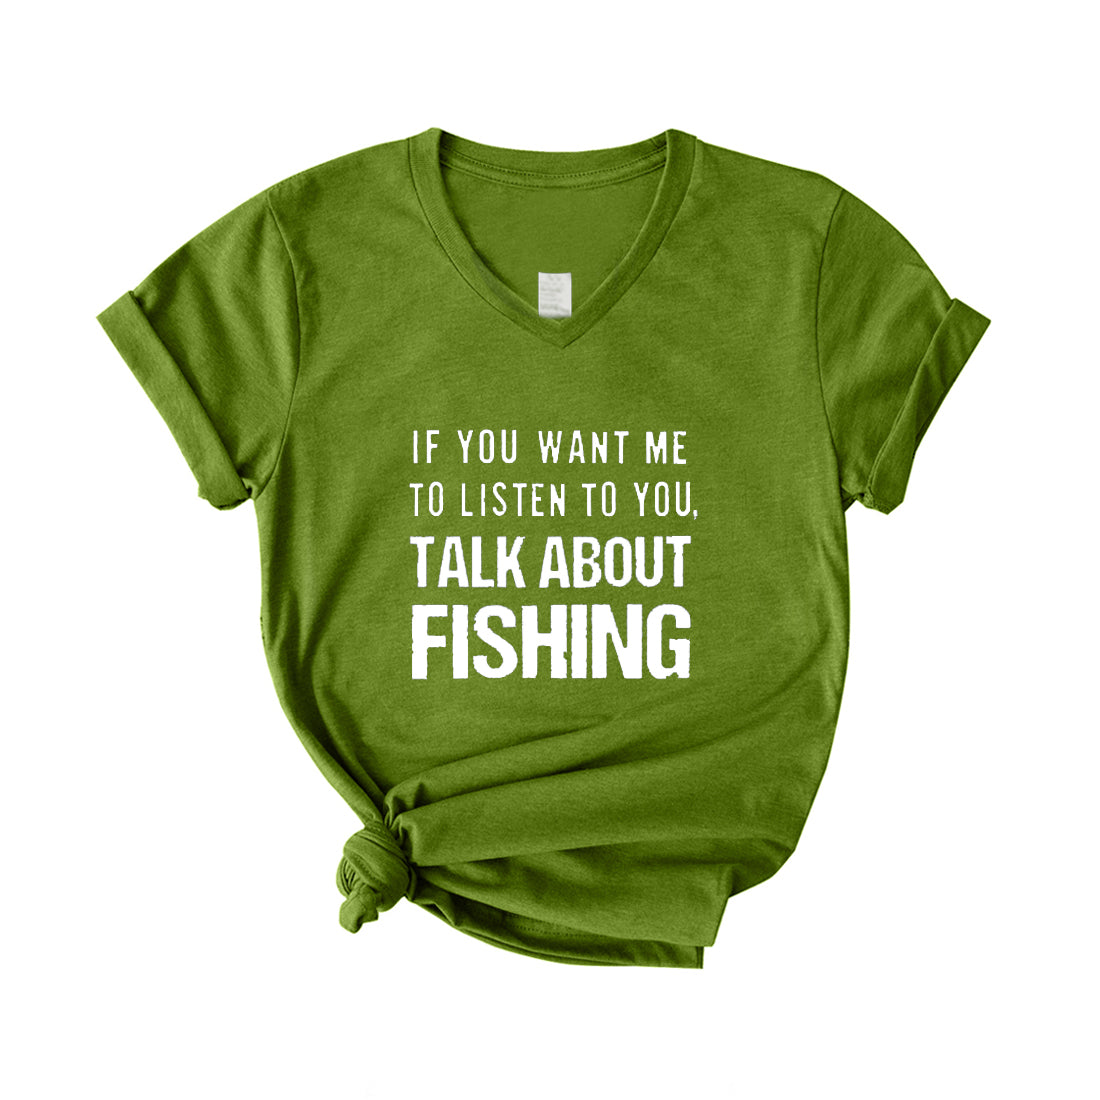 TALK ABOUT FISHING V Neck T-Shirt for Women